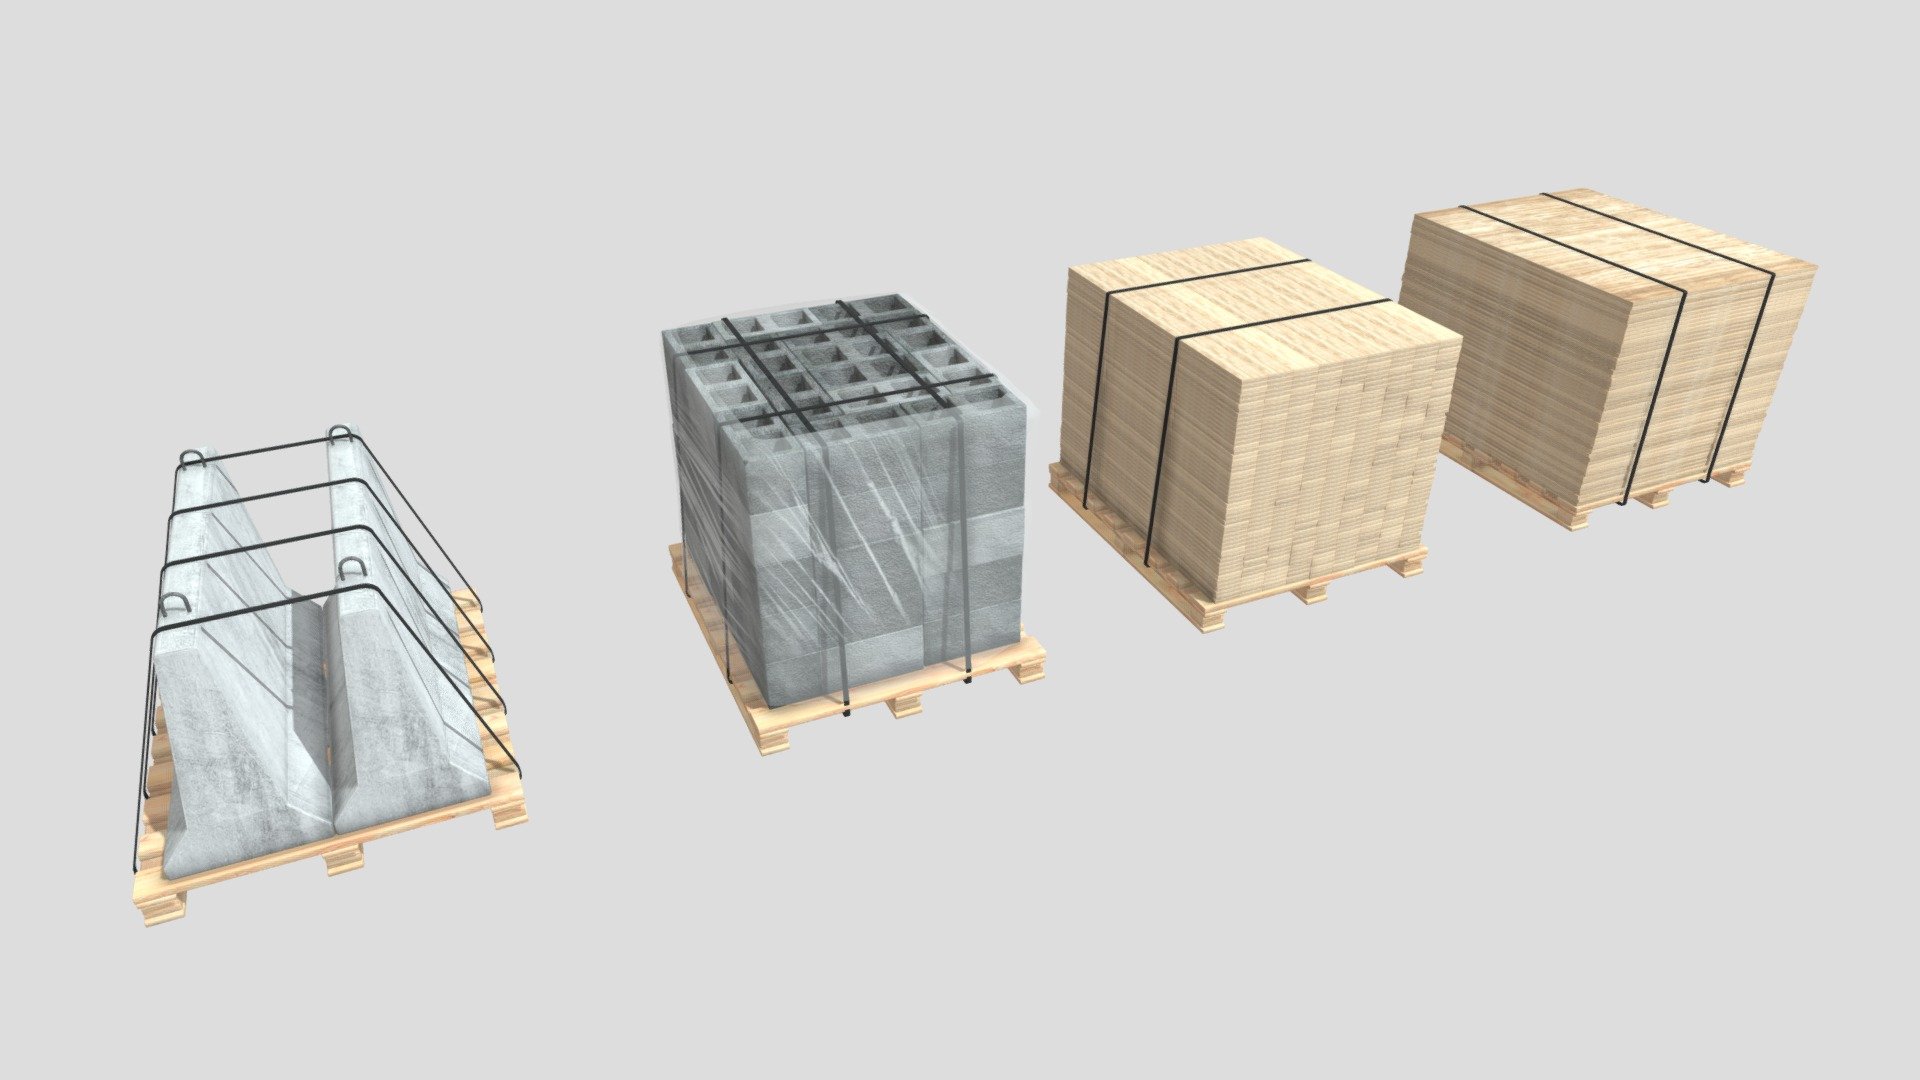 Palet Collection with cargo:

Concrete Trafic Barriers and bricks

Wood planks - Palet Collection 3 - Buy Royalty Free 3D model by kopofx 3d model